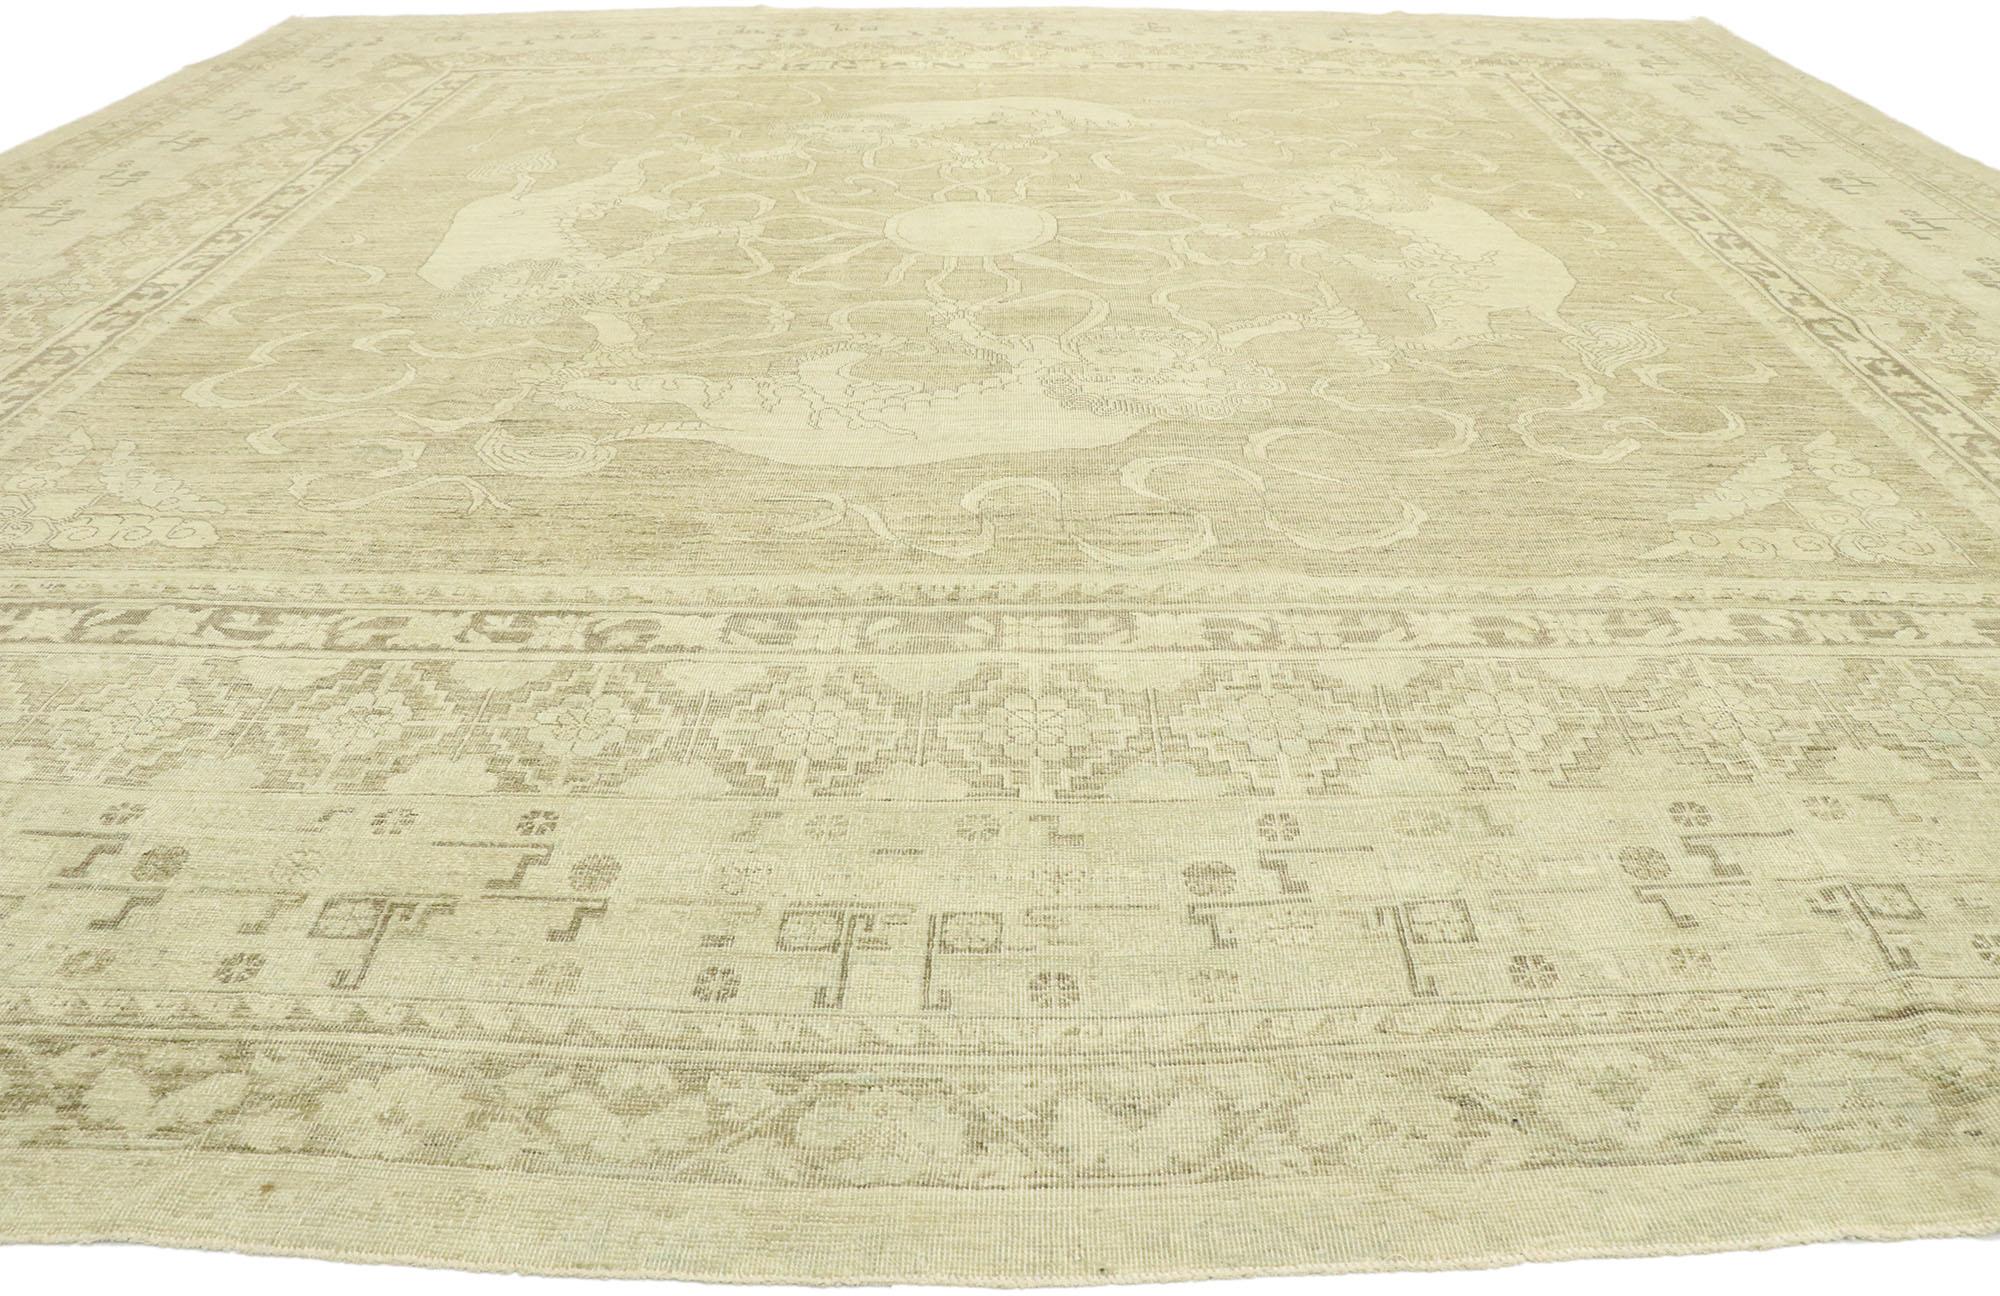 Transitional Style Rug with Khotan and Chinese Foo Dog Design, Square Rug (Handgeknüpft)